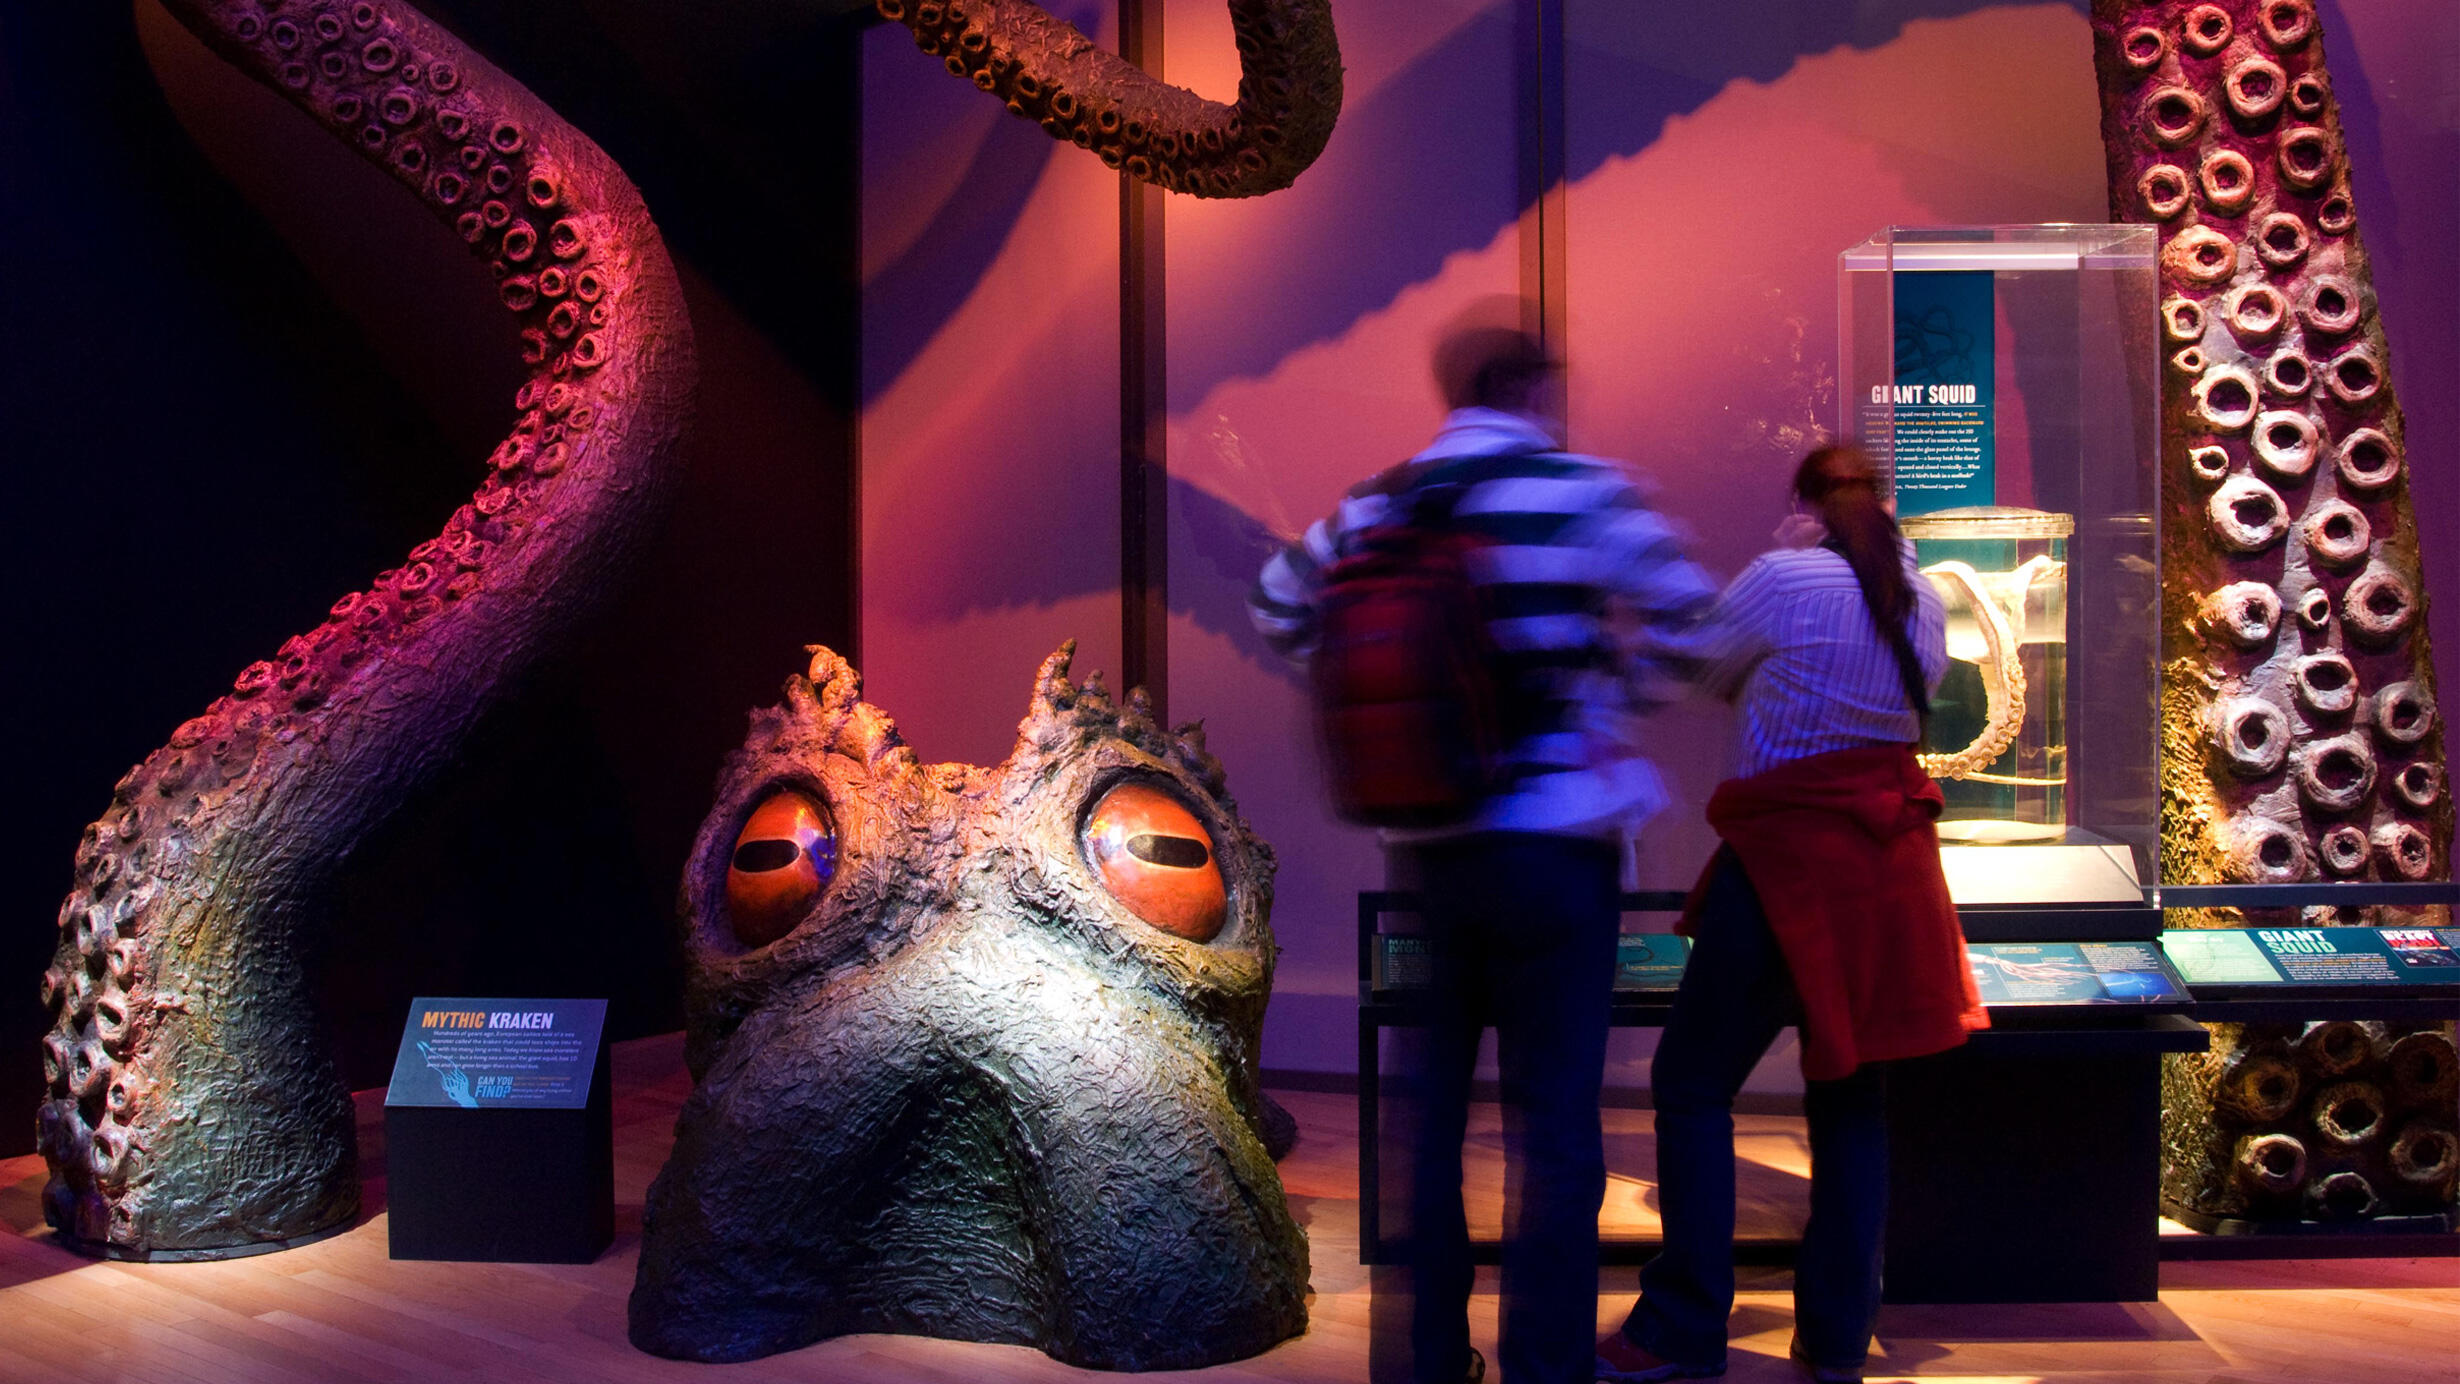 A couple looks at a giant model of a purple kraken head and tentacles that appear to be rising out of the floor